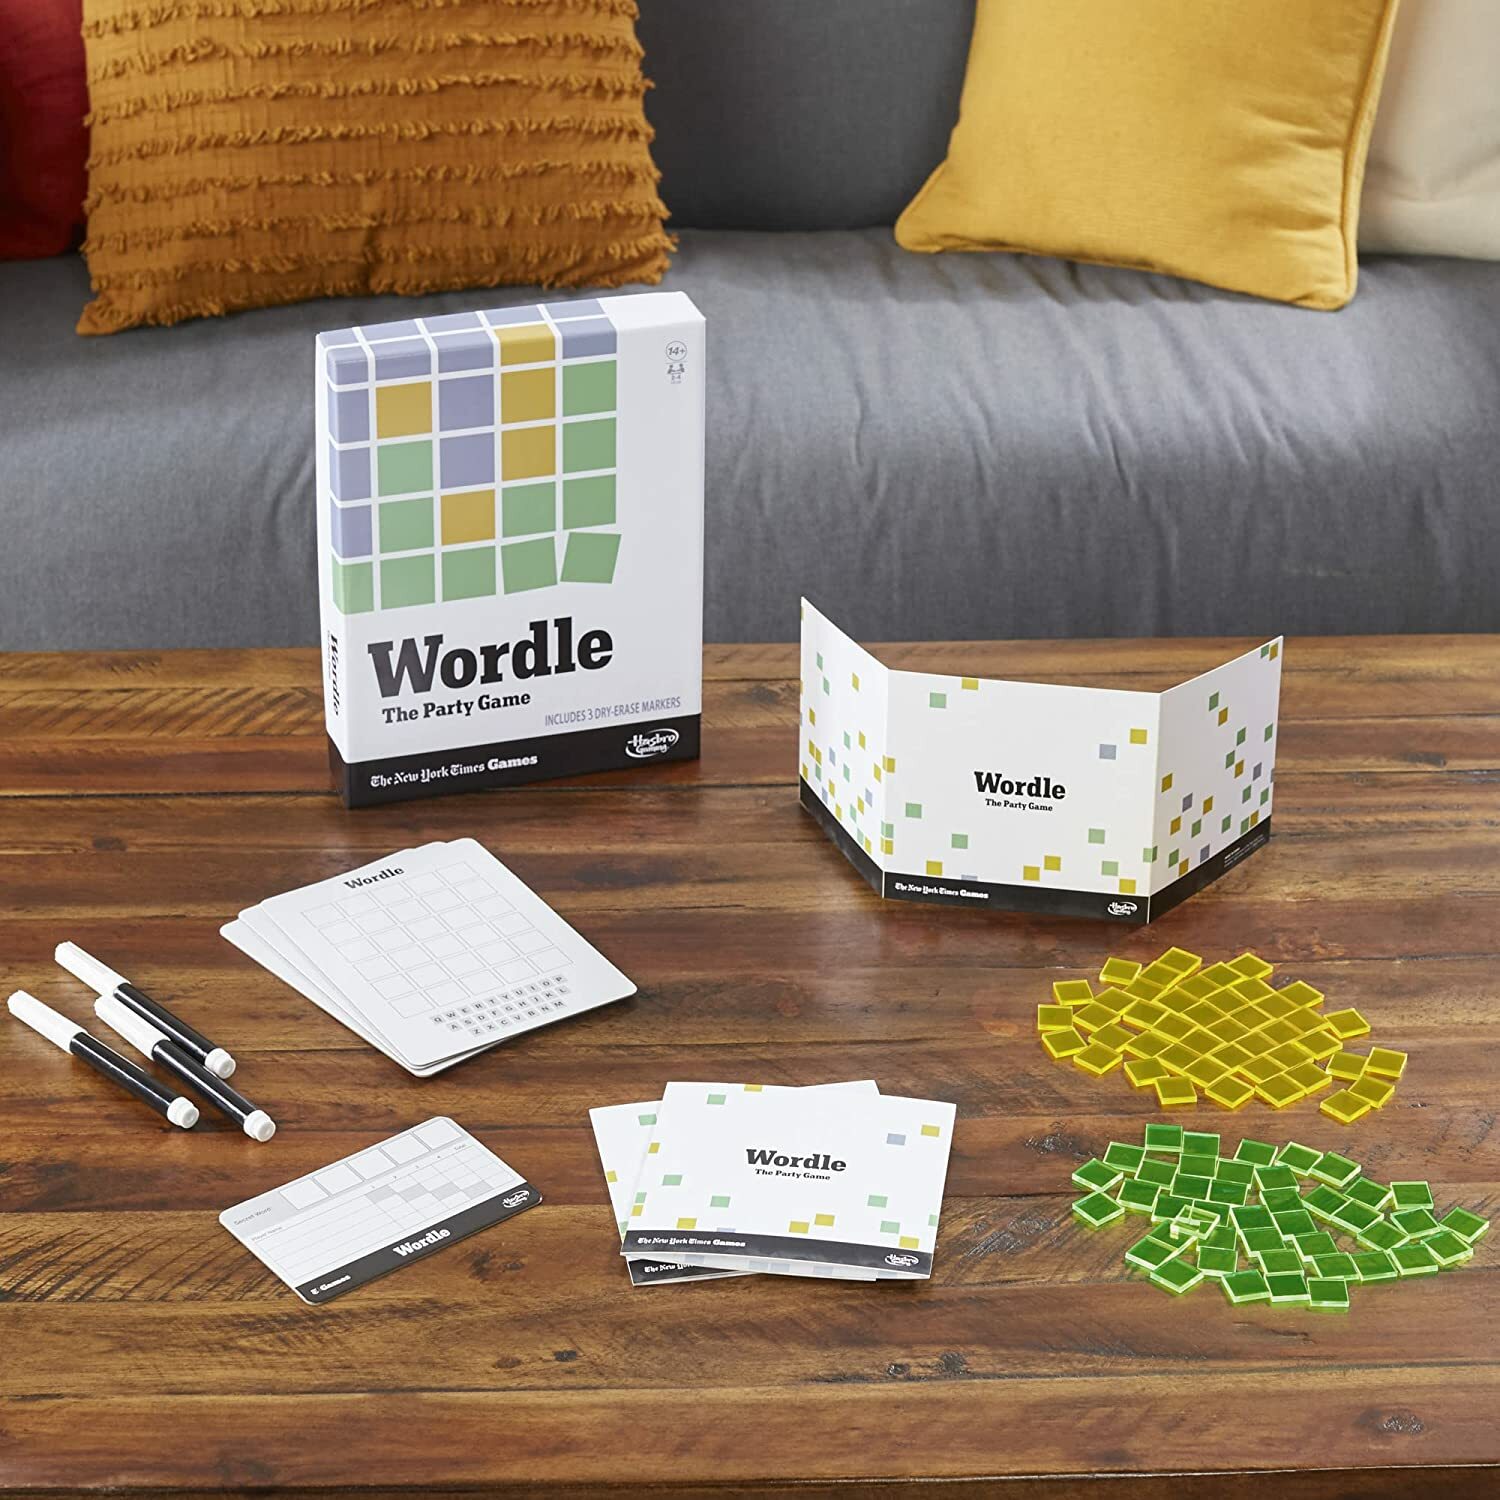 "wordle: the party game" laid out on a wooden table in front of a couch with colorful throw pillows